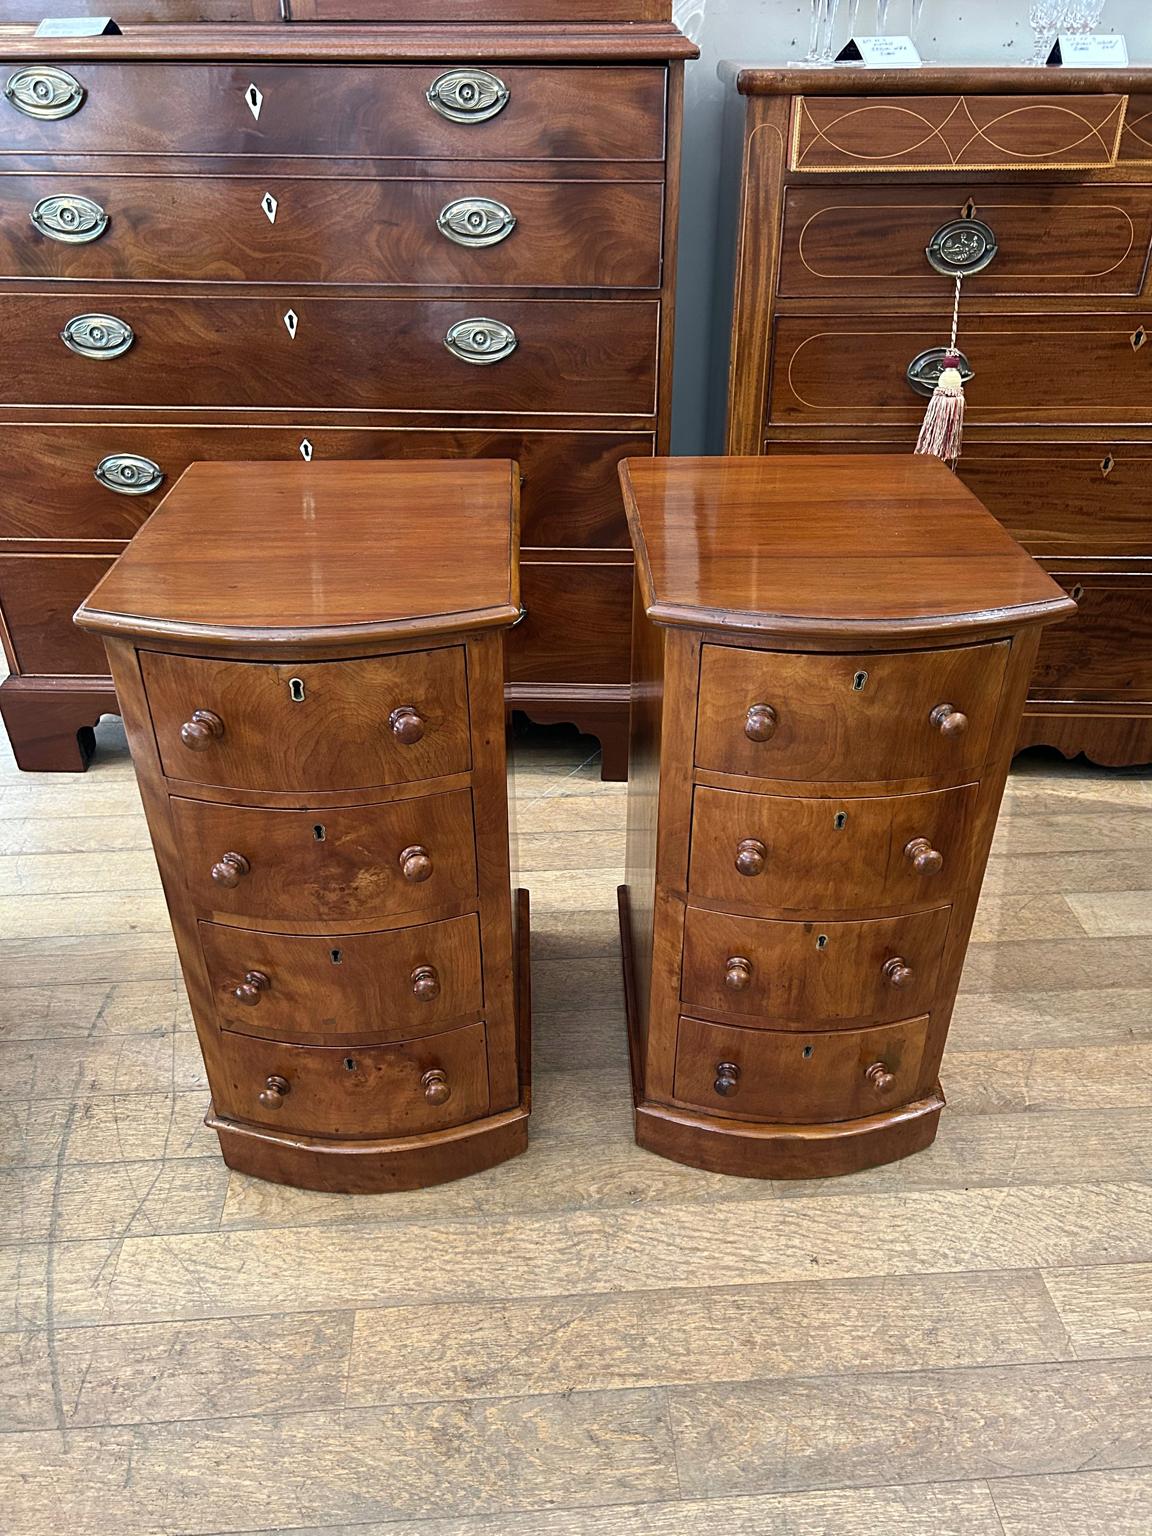 A Pair of 19th Century Victorian Walnut Bedside Tables with four fitted drawers and turned bun handles x2.

Circa: 1860

Dimensions:
Height:  27 inches – 69 cms
Width: 14.5 inches – 37 cms
Depth:  17.75 inches – 45 cms

Reference: CP2302